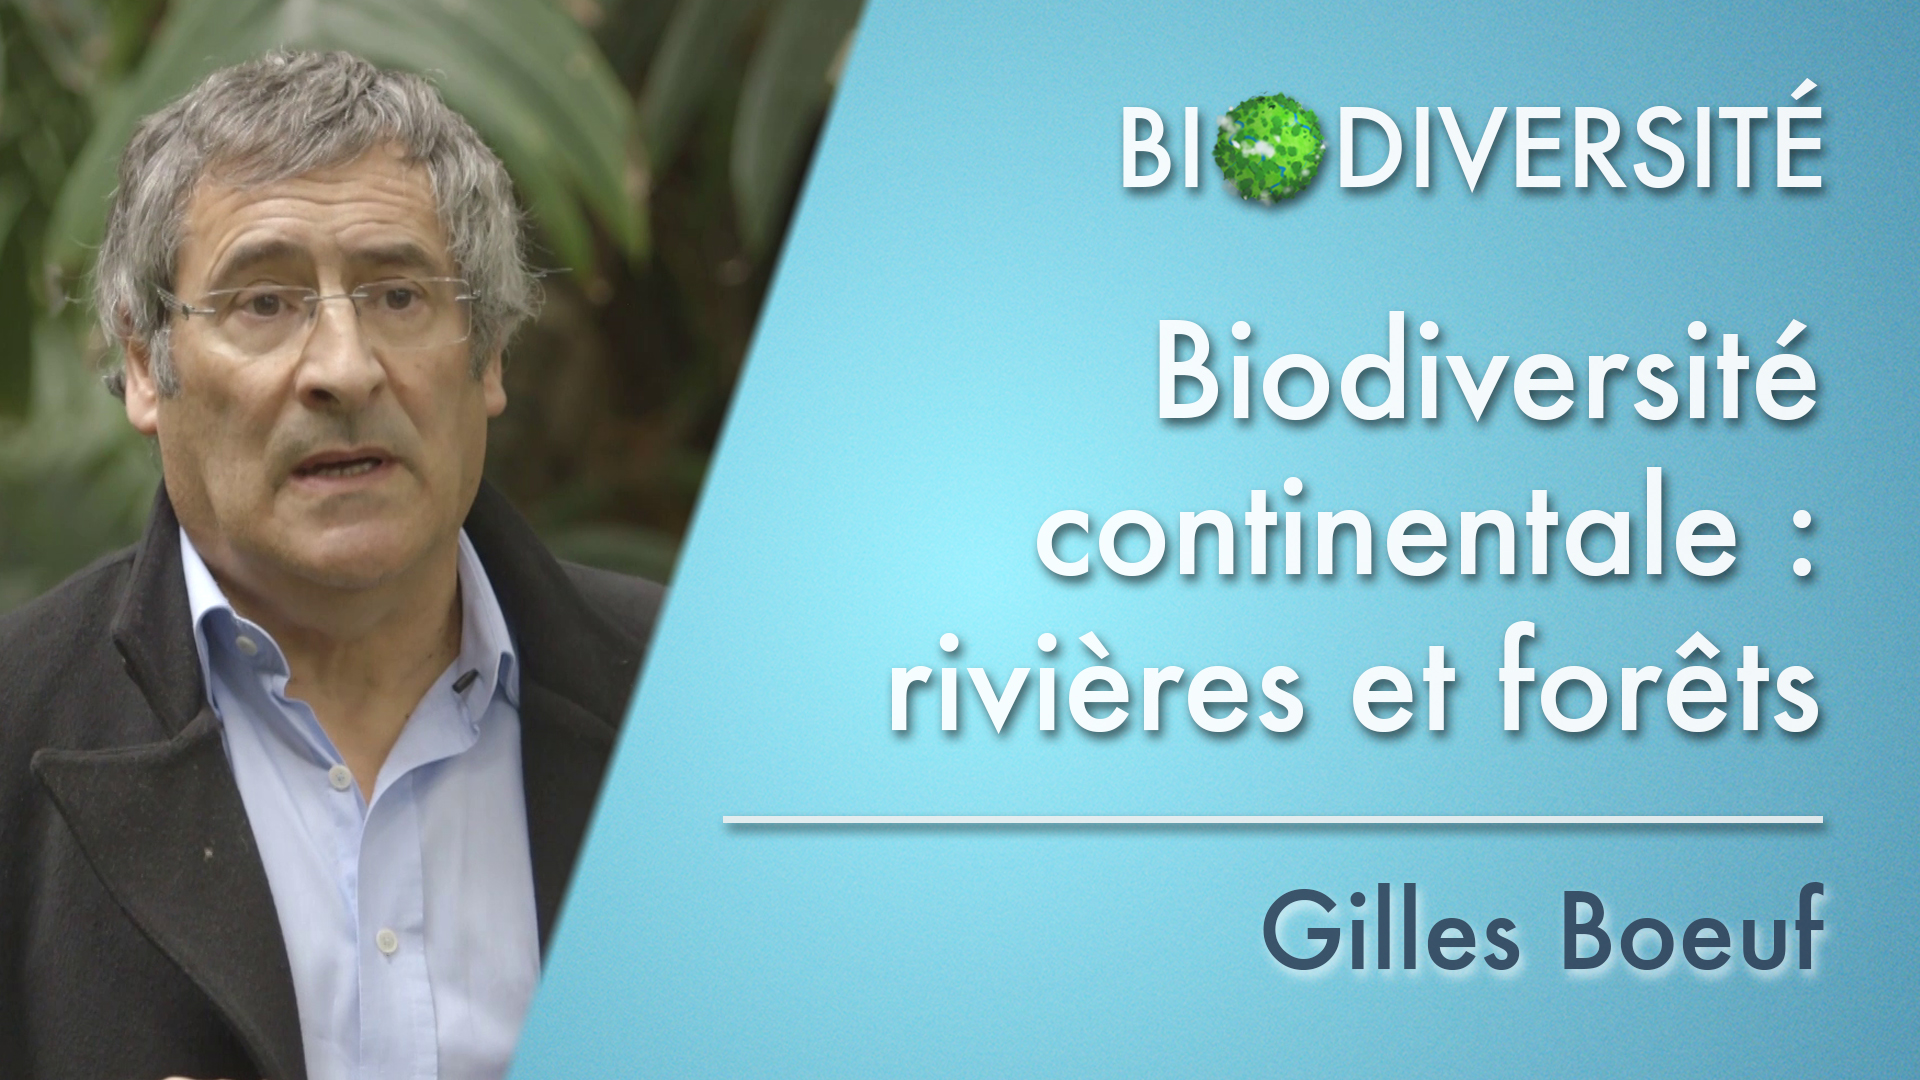 Continental biodiversity: rivers and forests - Introduction